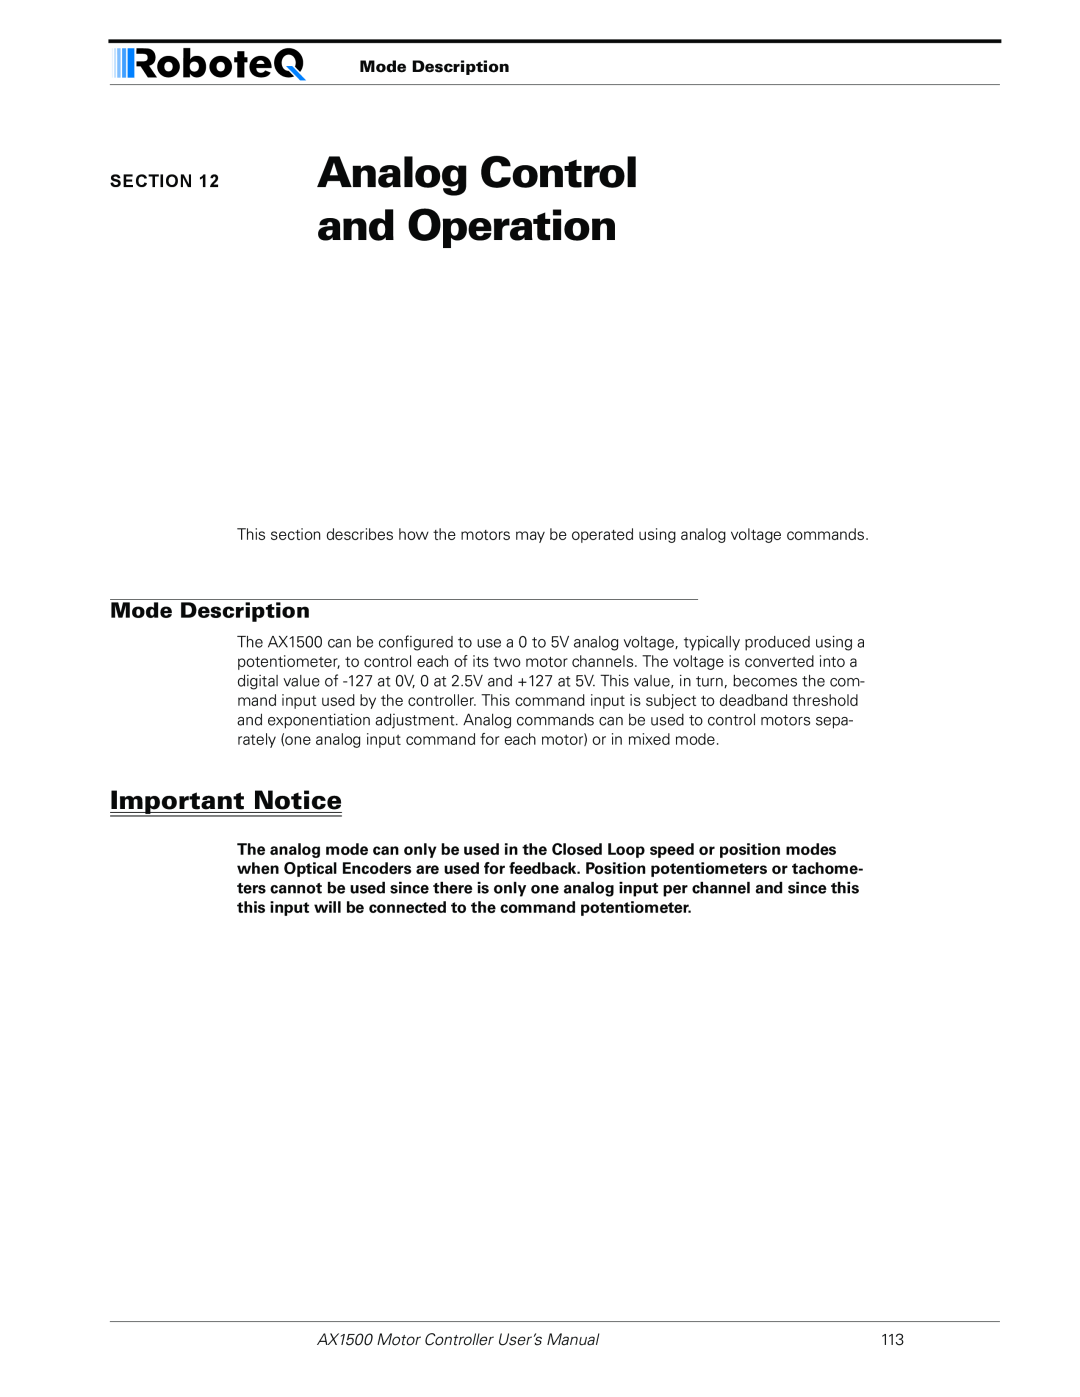 RoboteQ AX2550 Analog Control and Operation, Important Notice, Mode Description, AX1500 Motor Controller User’s Manual 